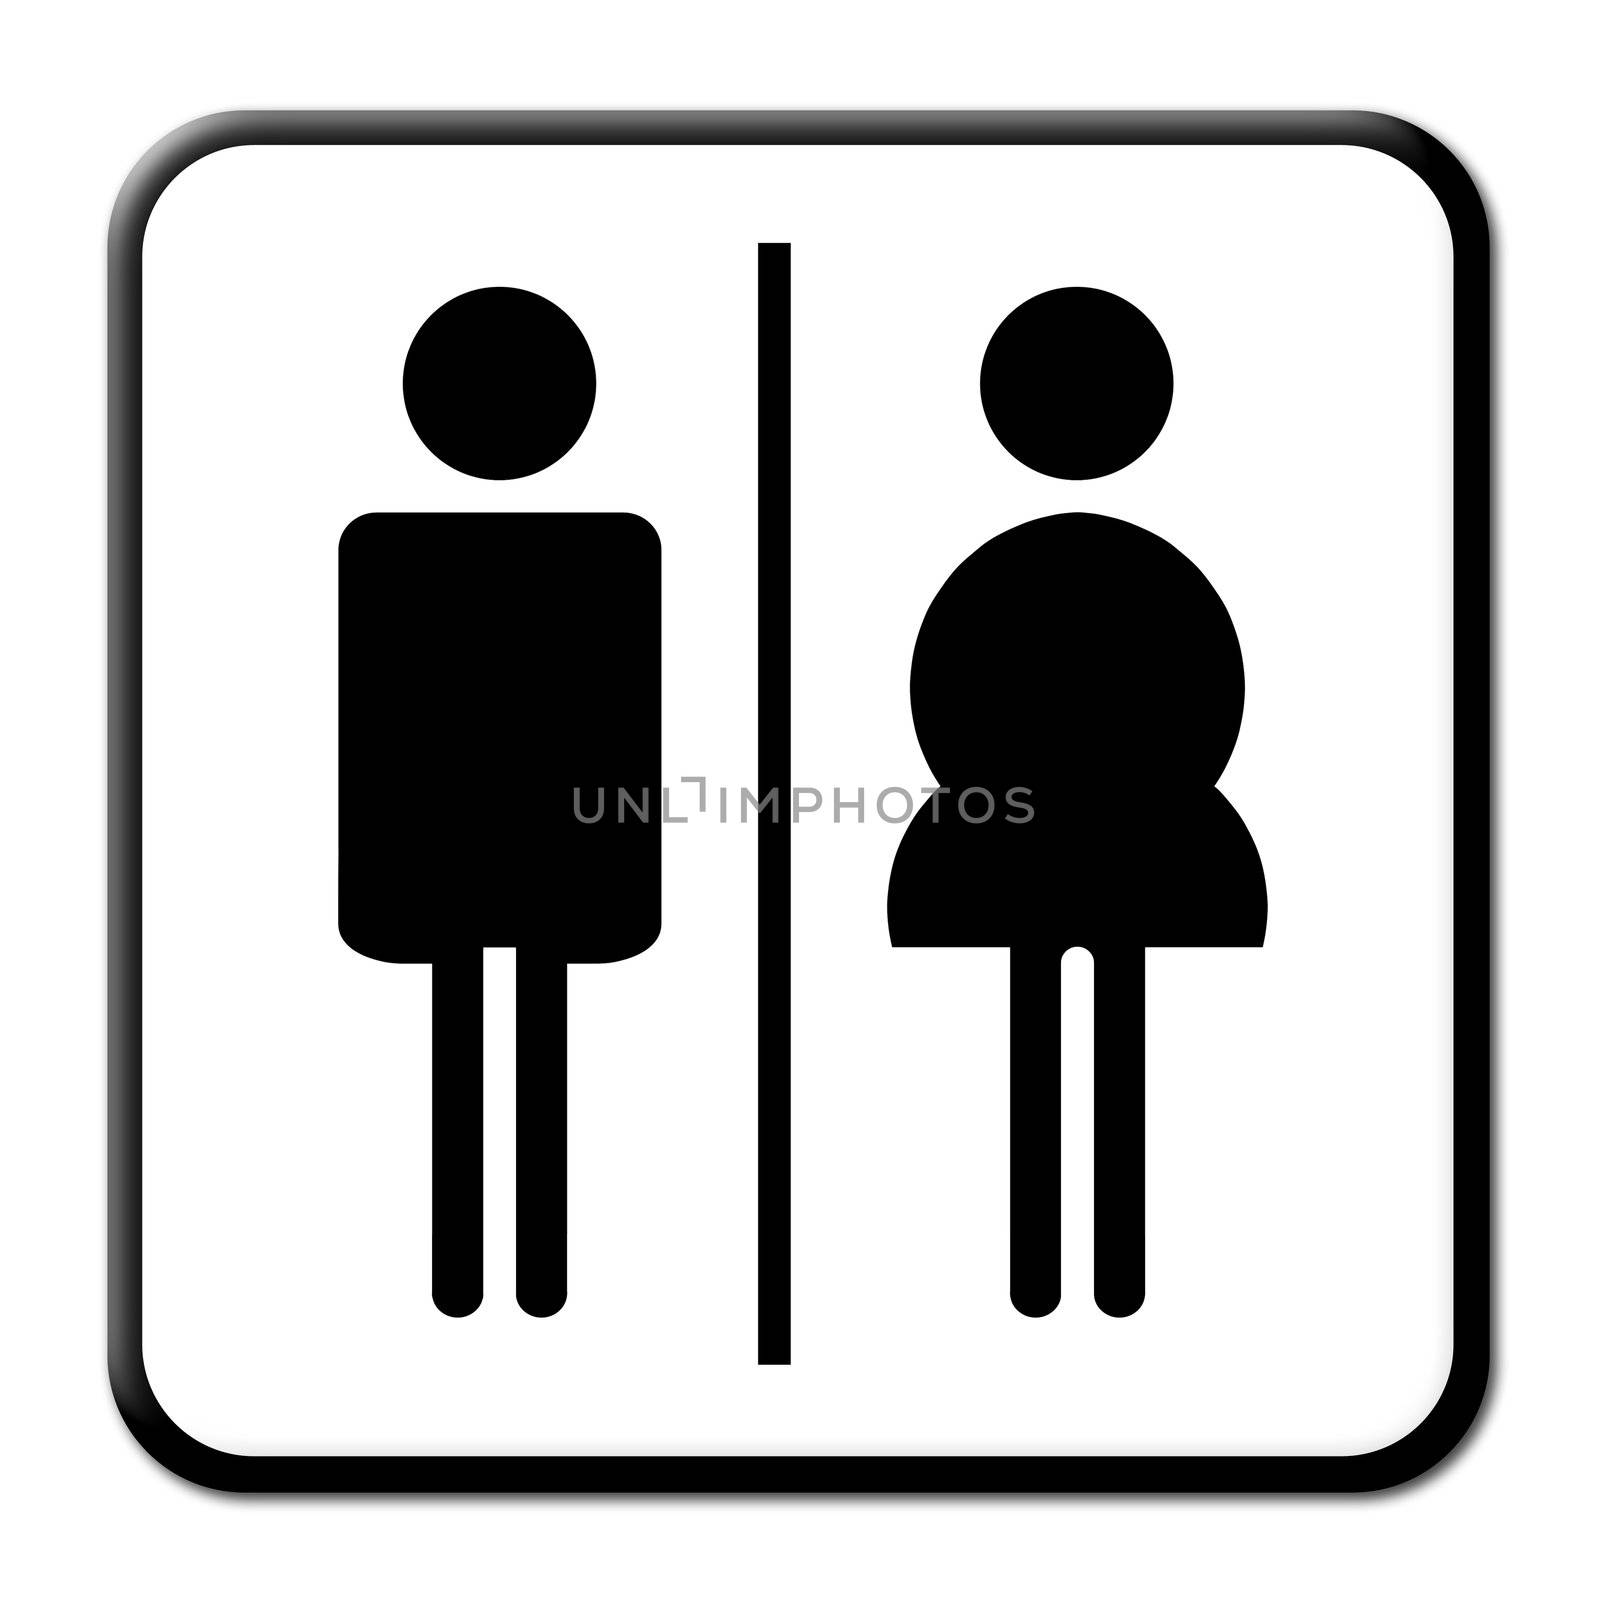 Man & Woman restroom sign on white